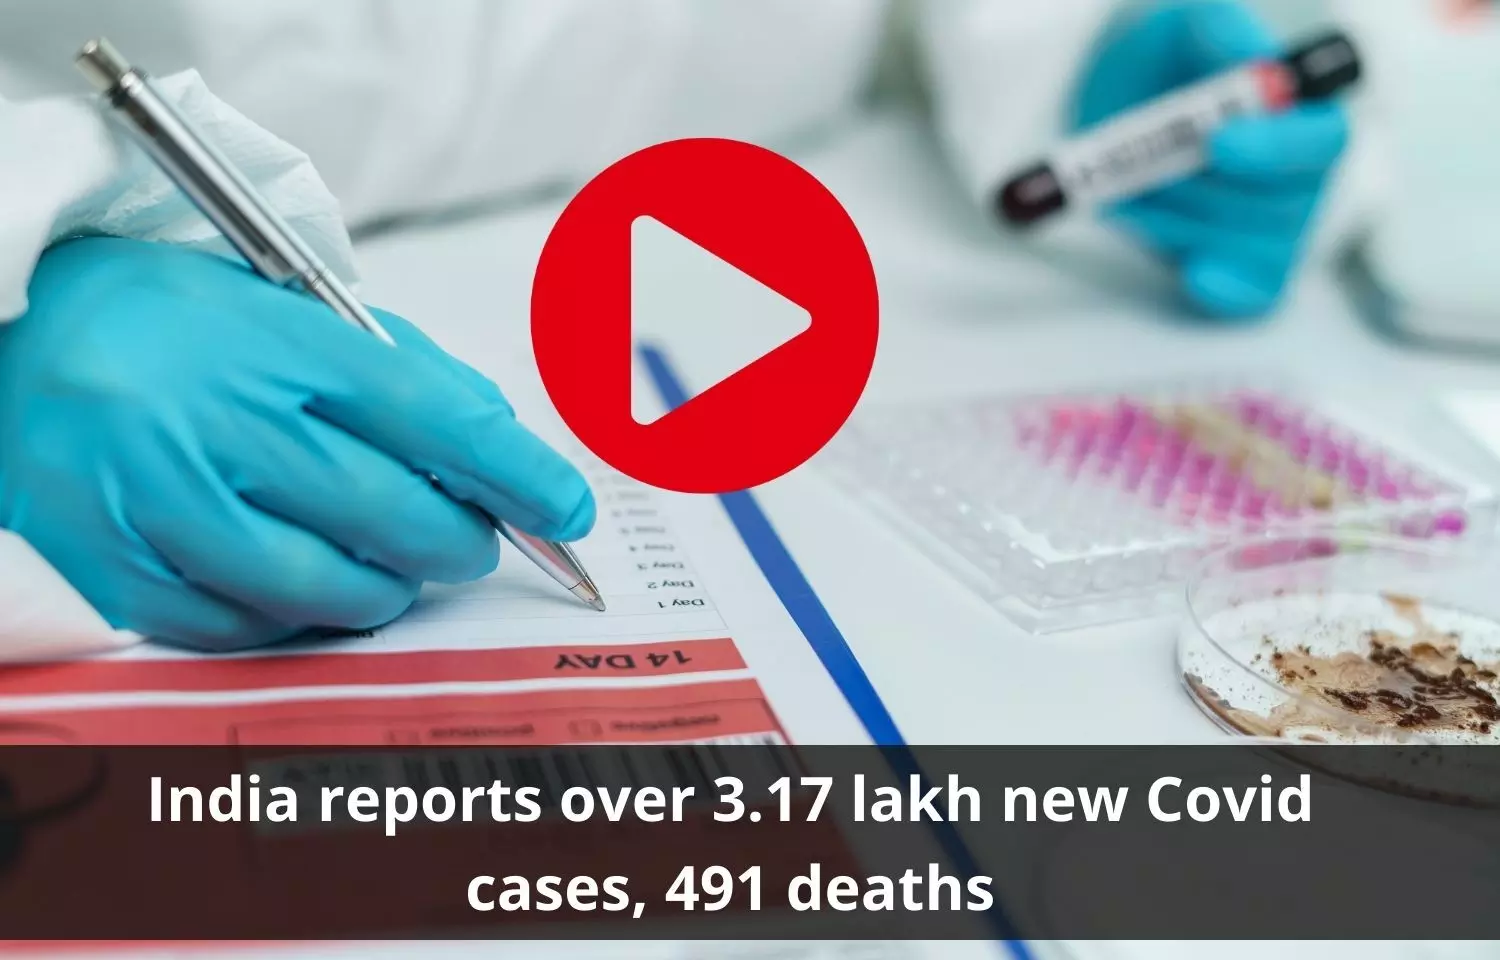 Over 3.17 lakh new Covid cases, 491 deaths in India